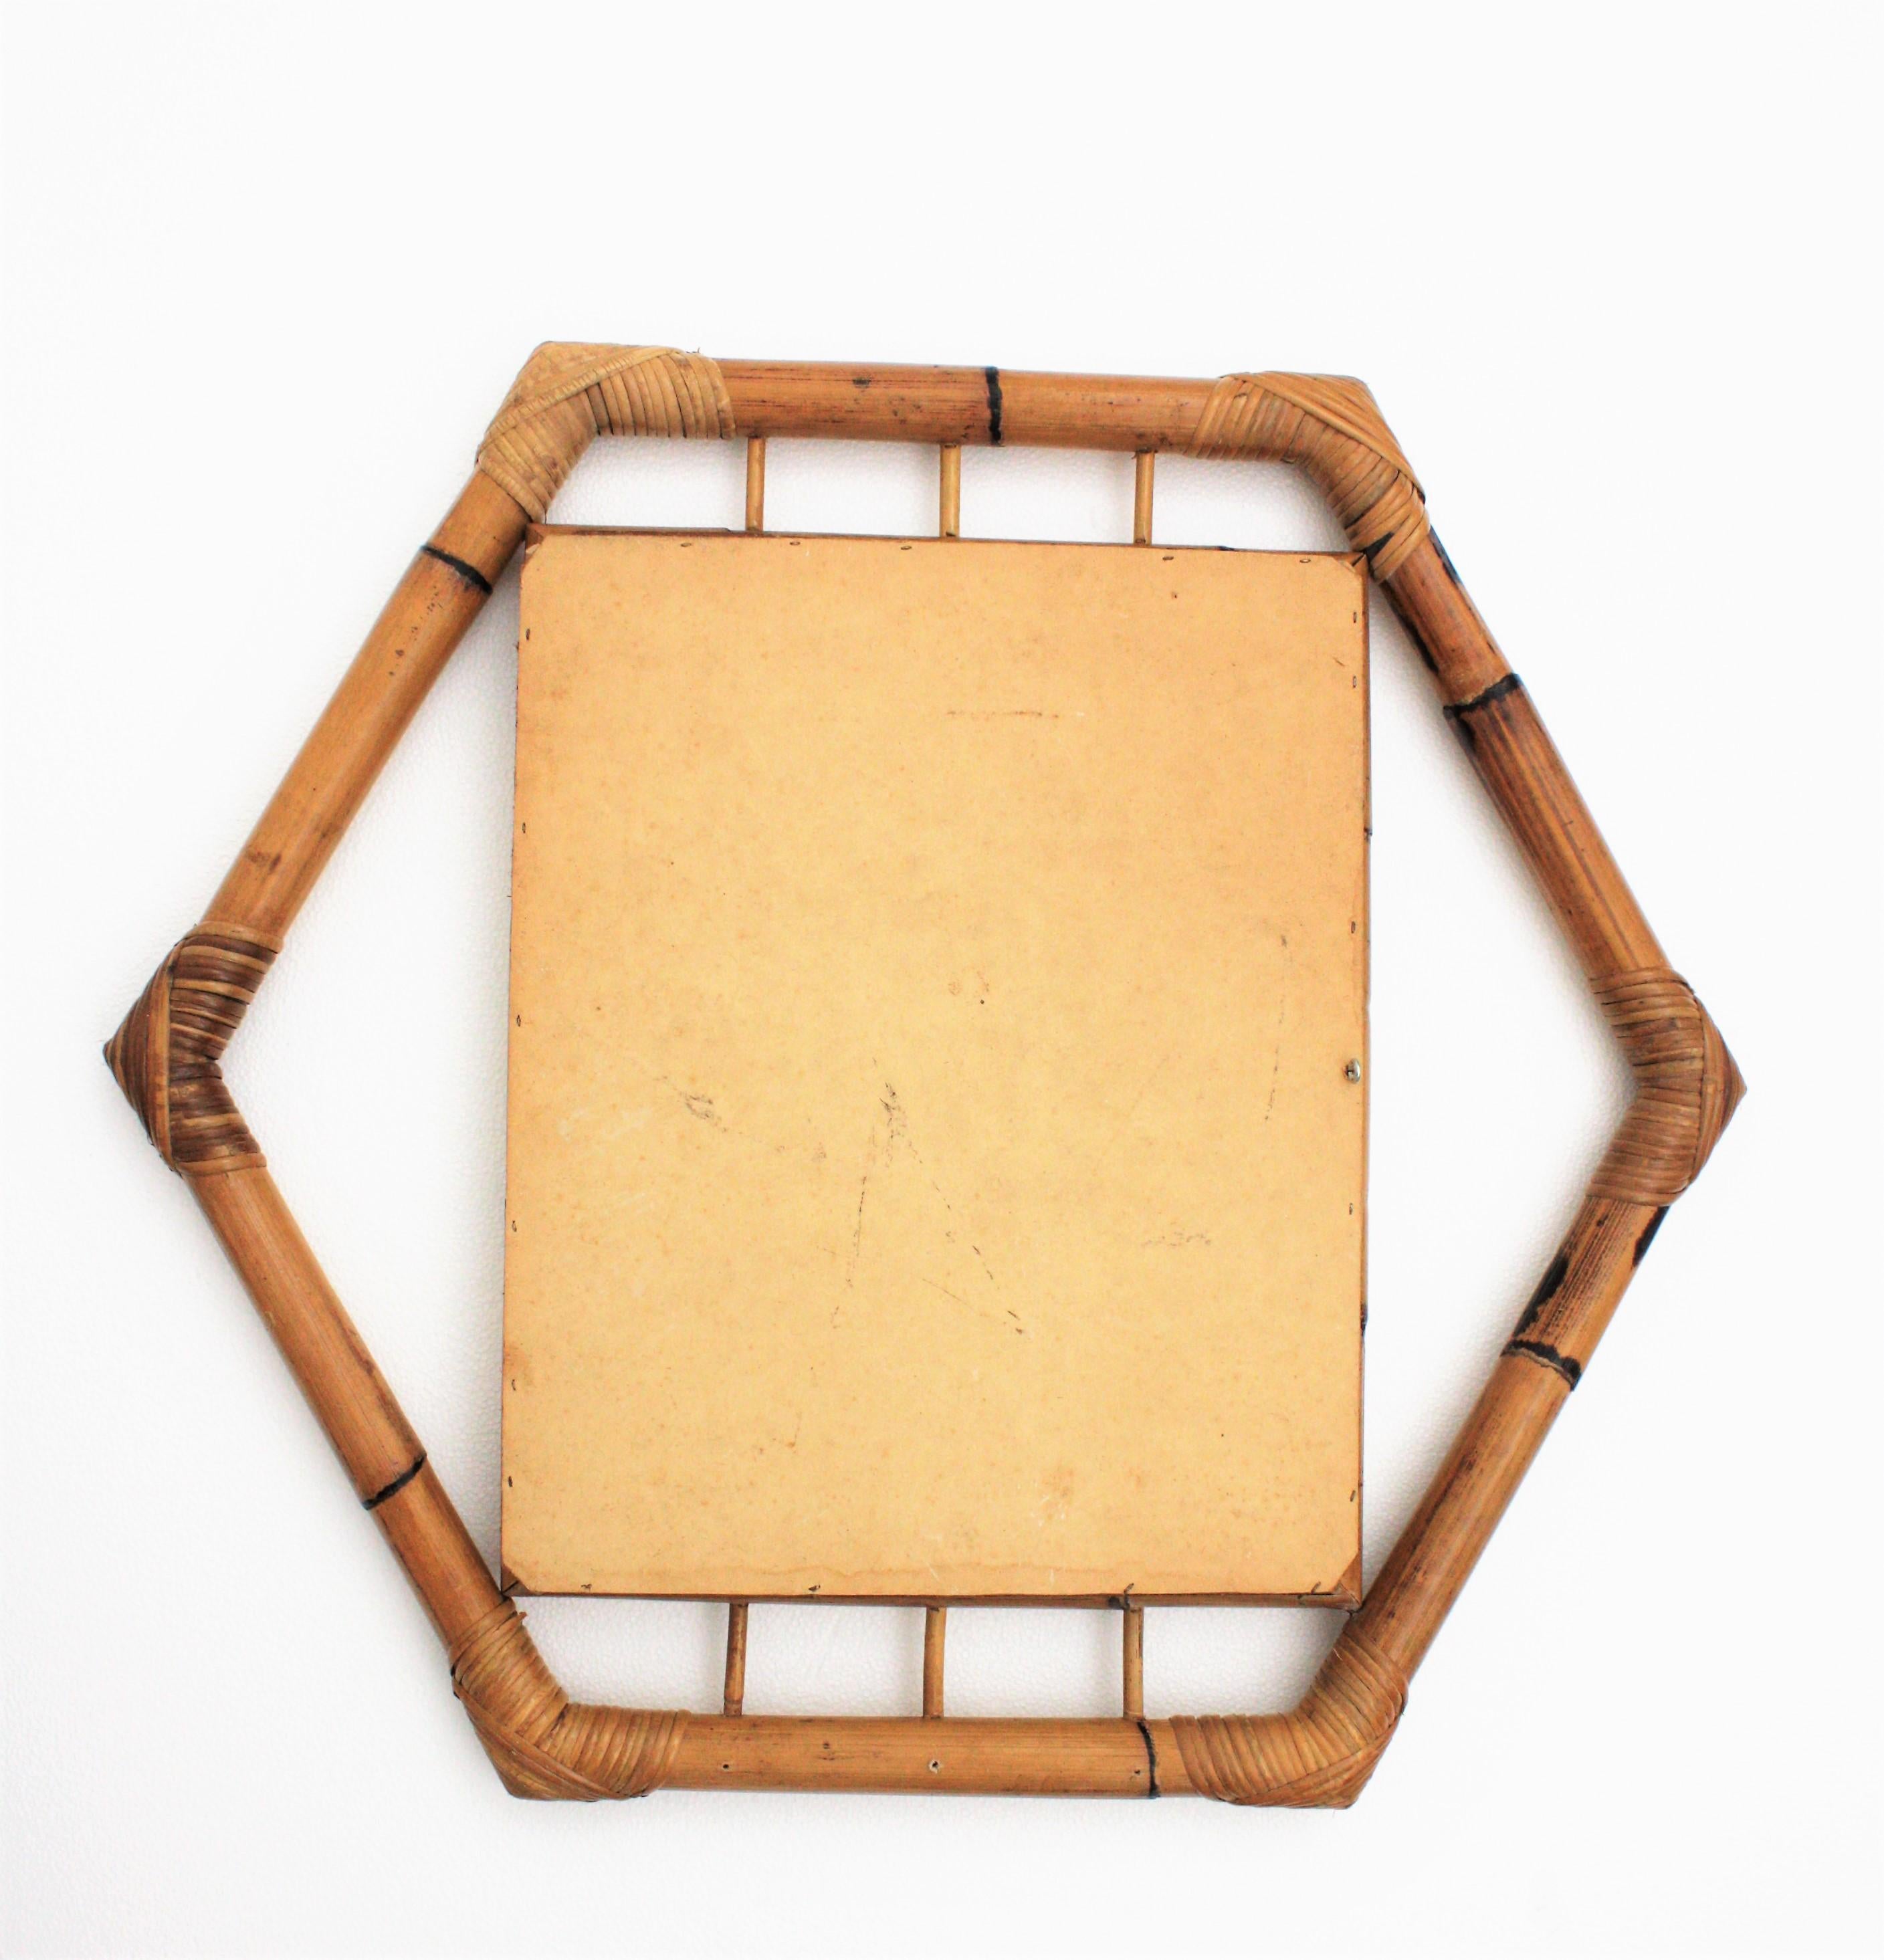 Bamboo Hexagonal Mirror with Smoked Glass, France, 1950s For Sale 7